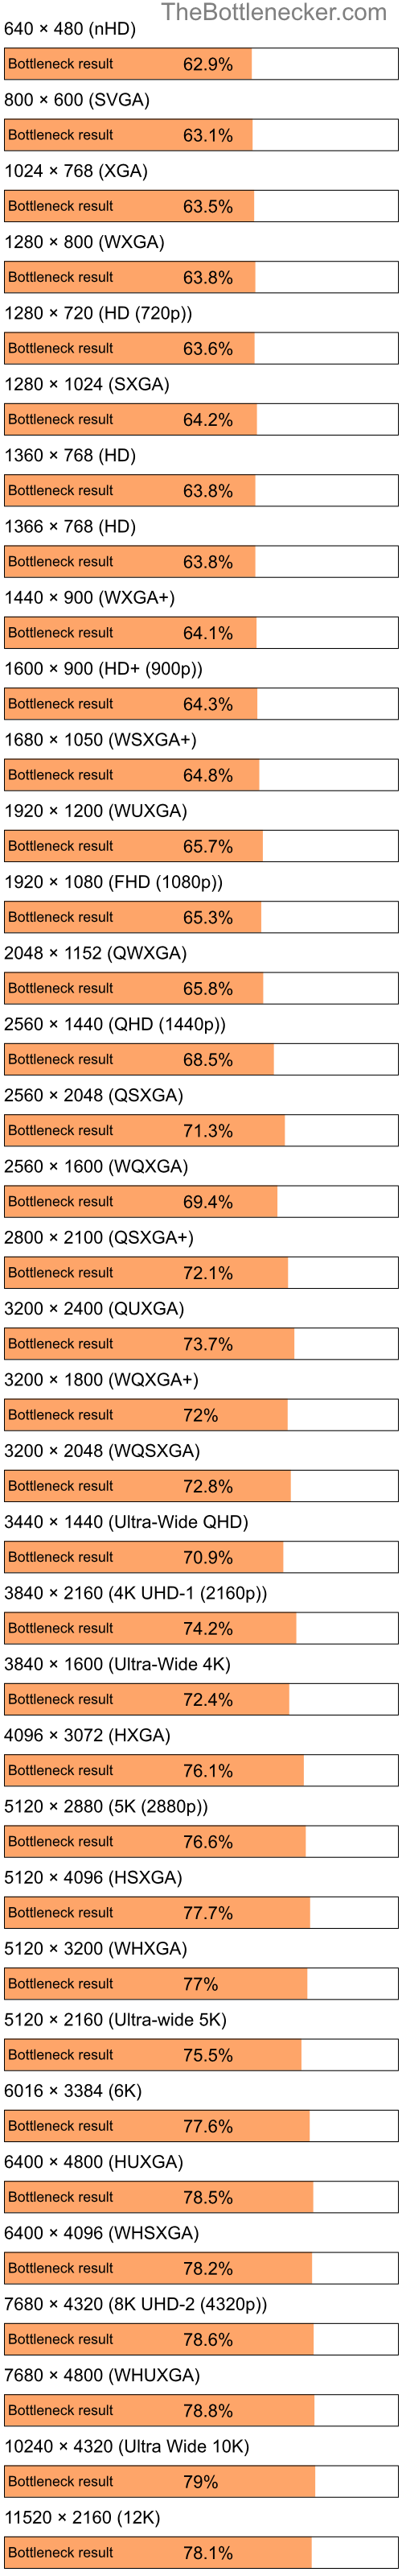 Bottleneck results by resolution for Intel Pentium 4 and AMD Radeon 9800 PRO in Processor Intense Tasks